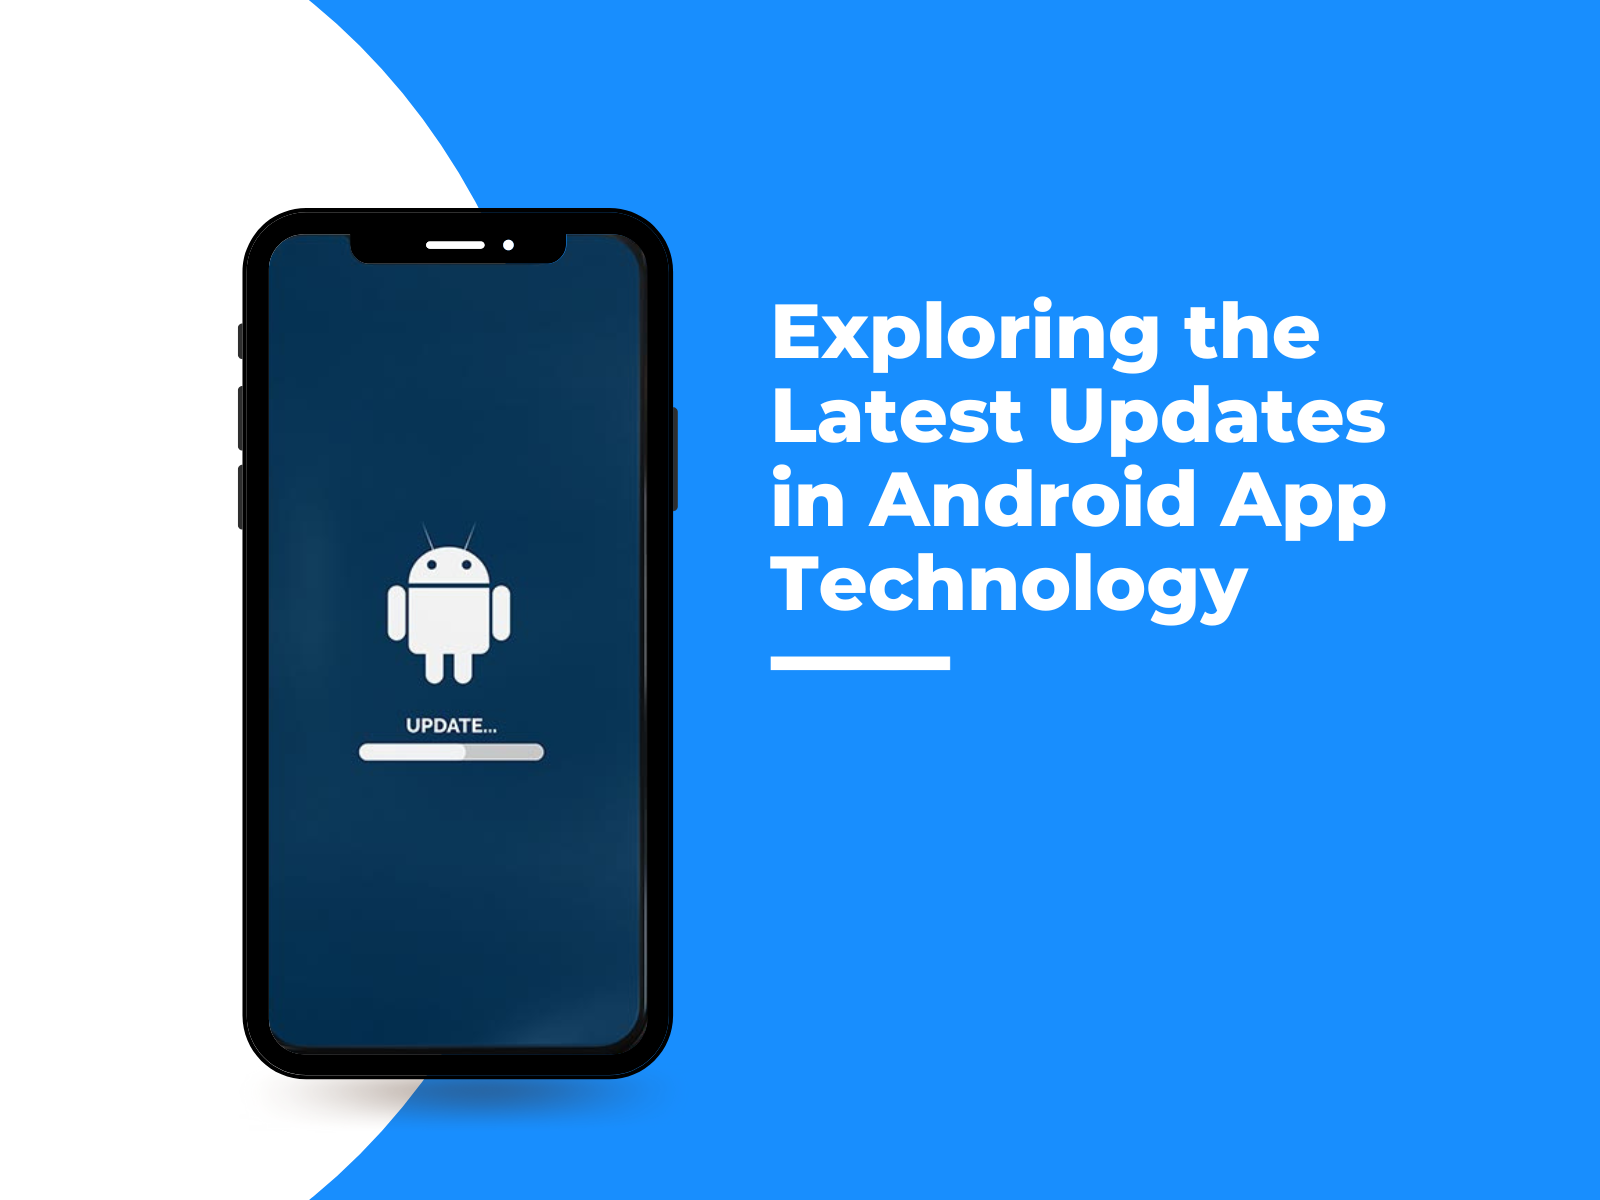 Updates in Android App Technology